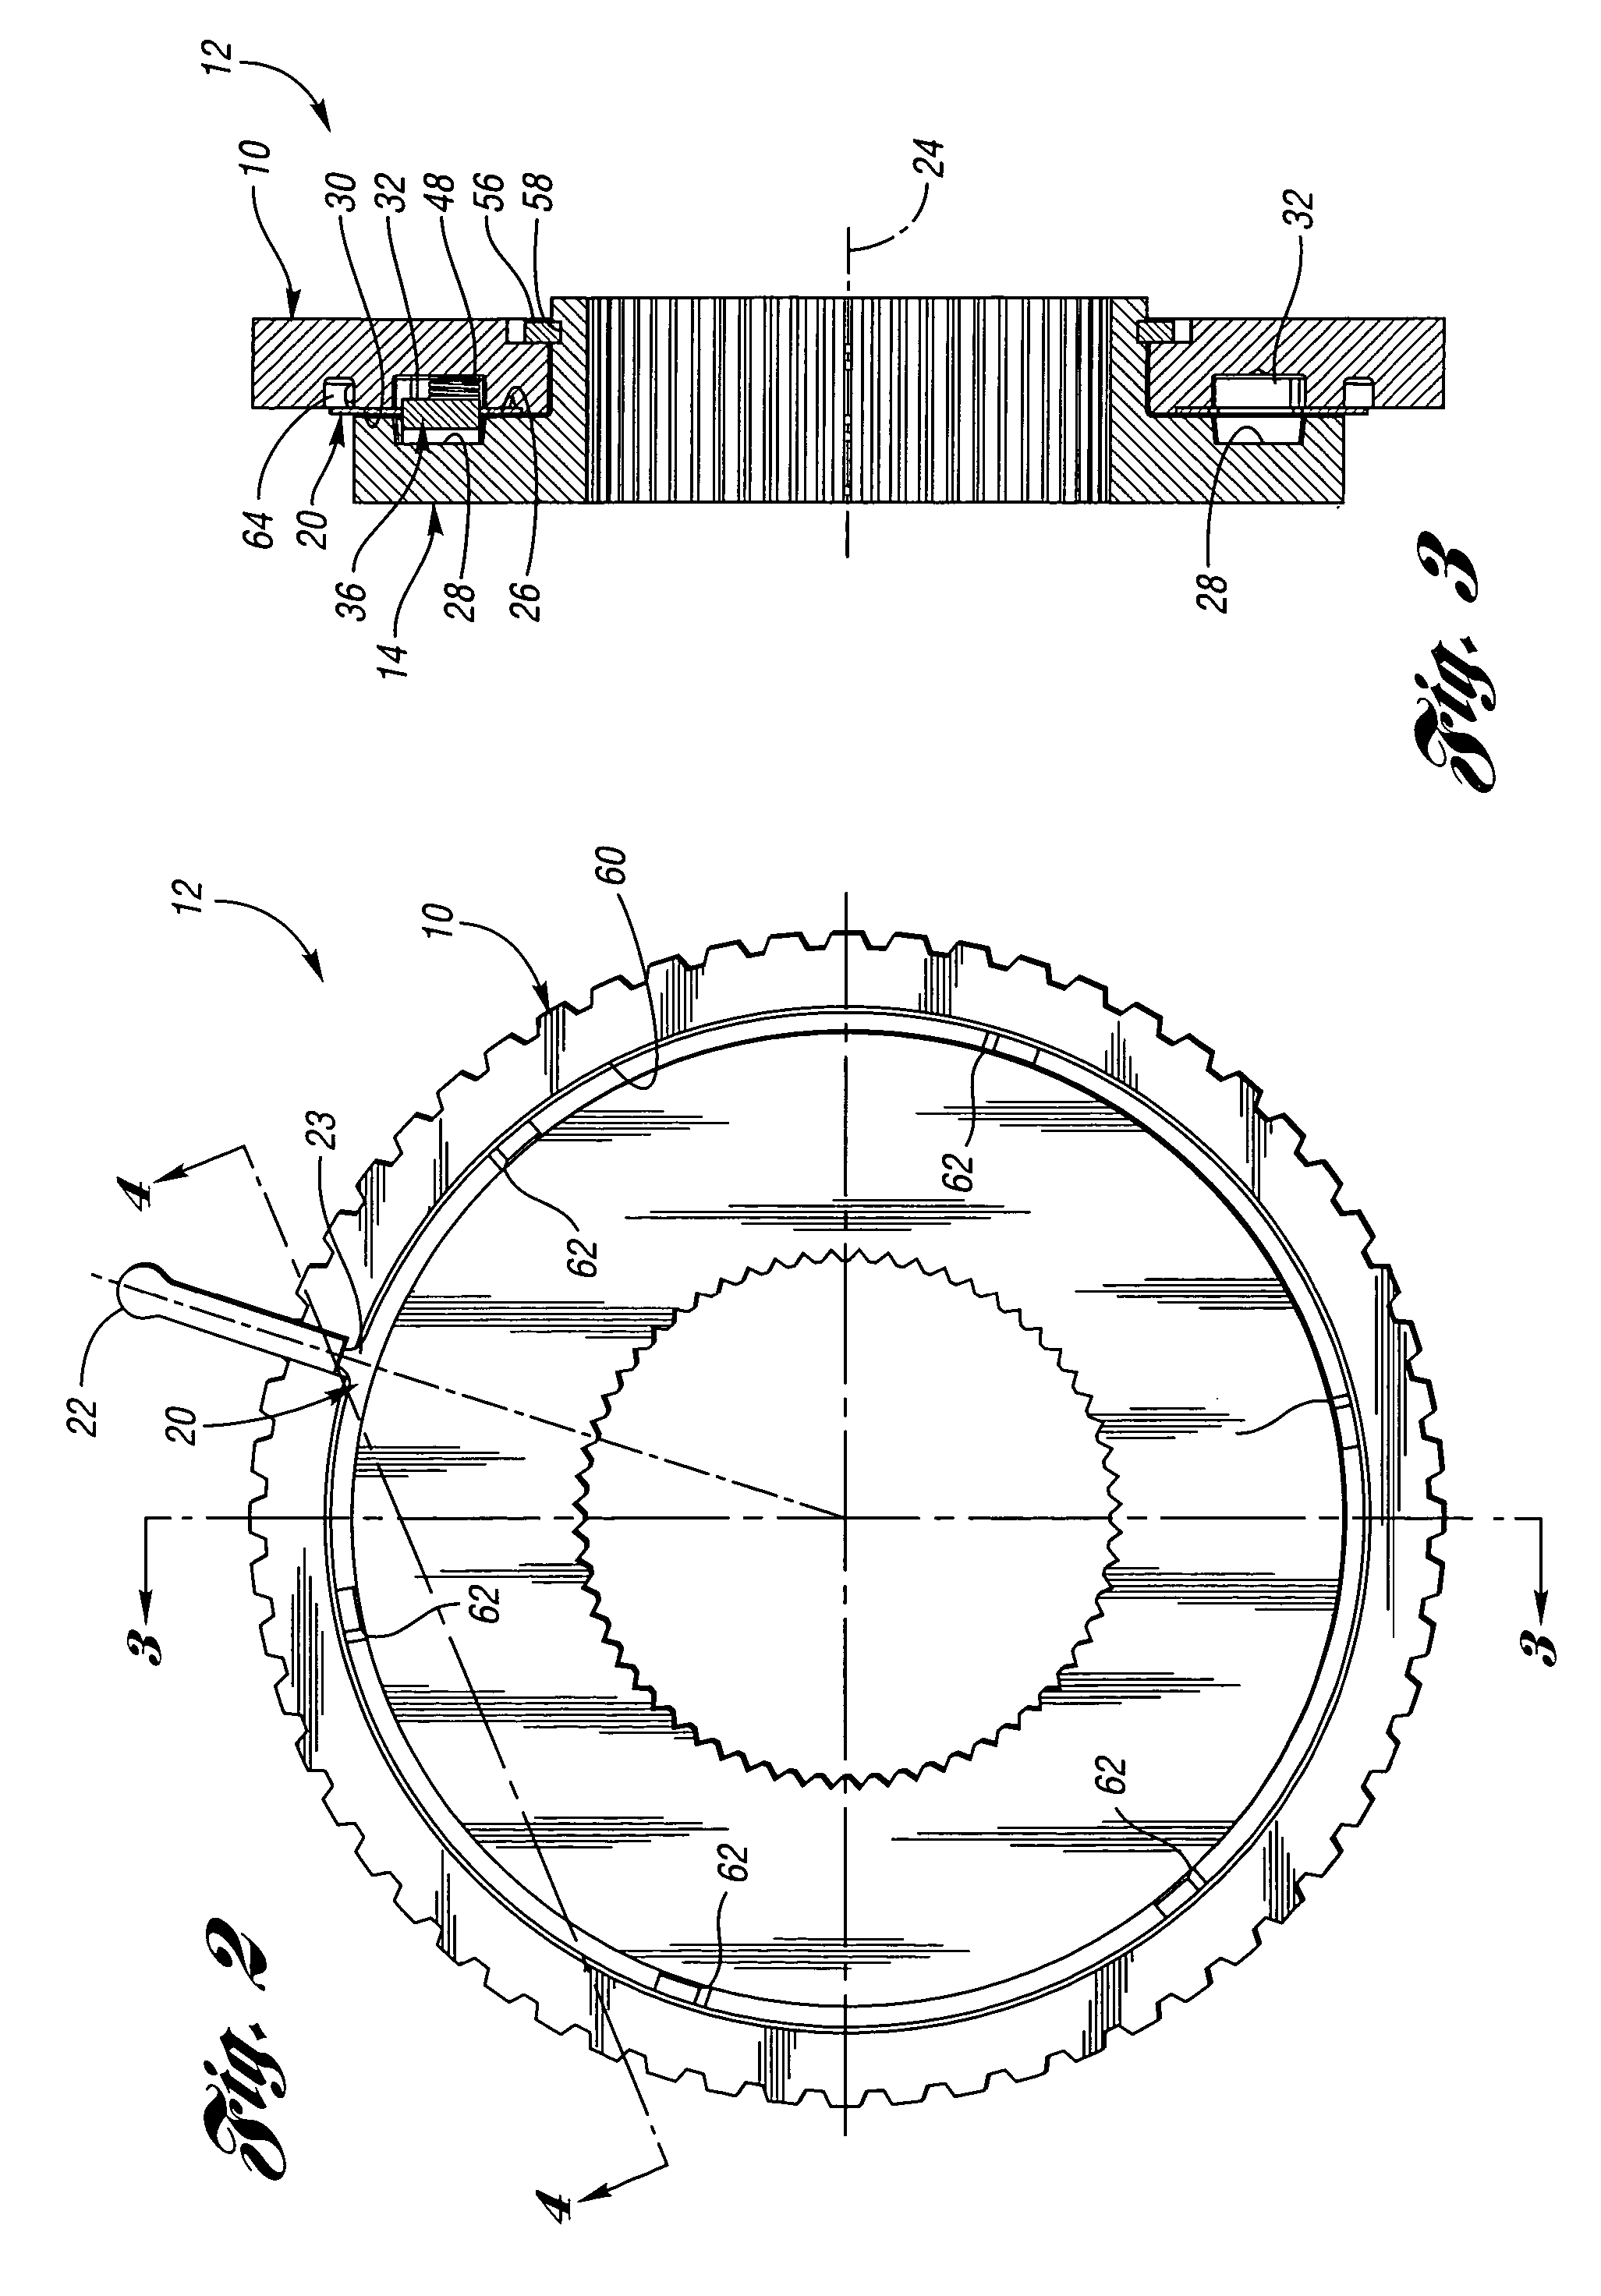 Overrunning coupling assembly and method for controlling the engagement of planar members